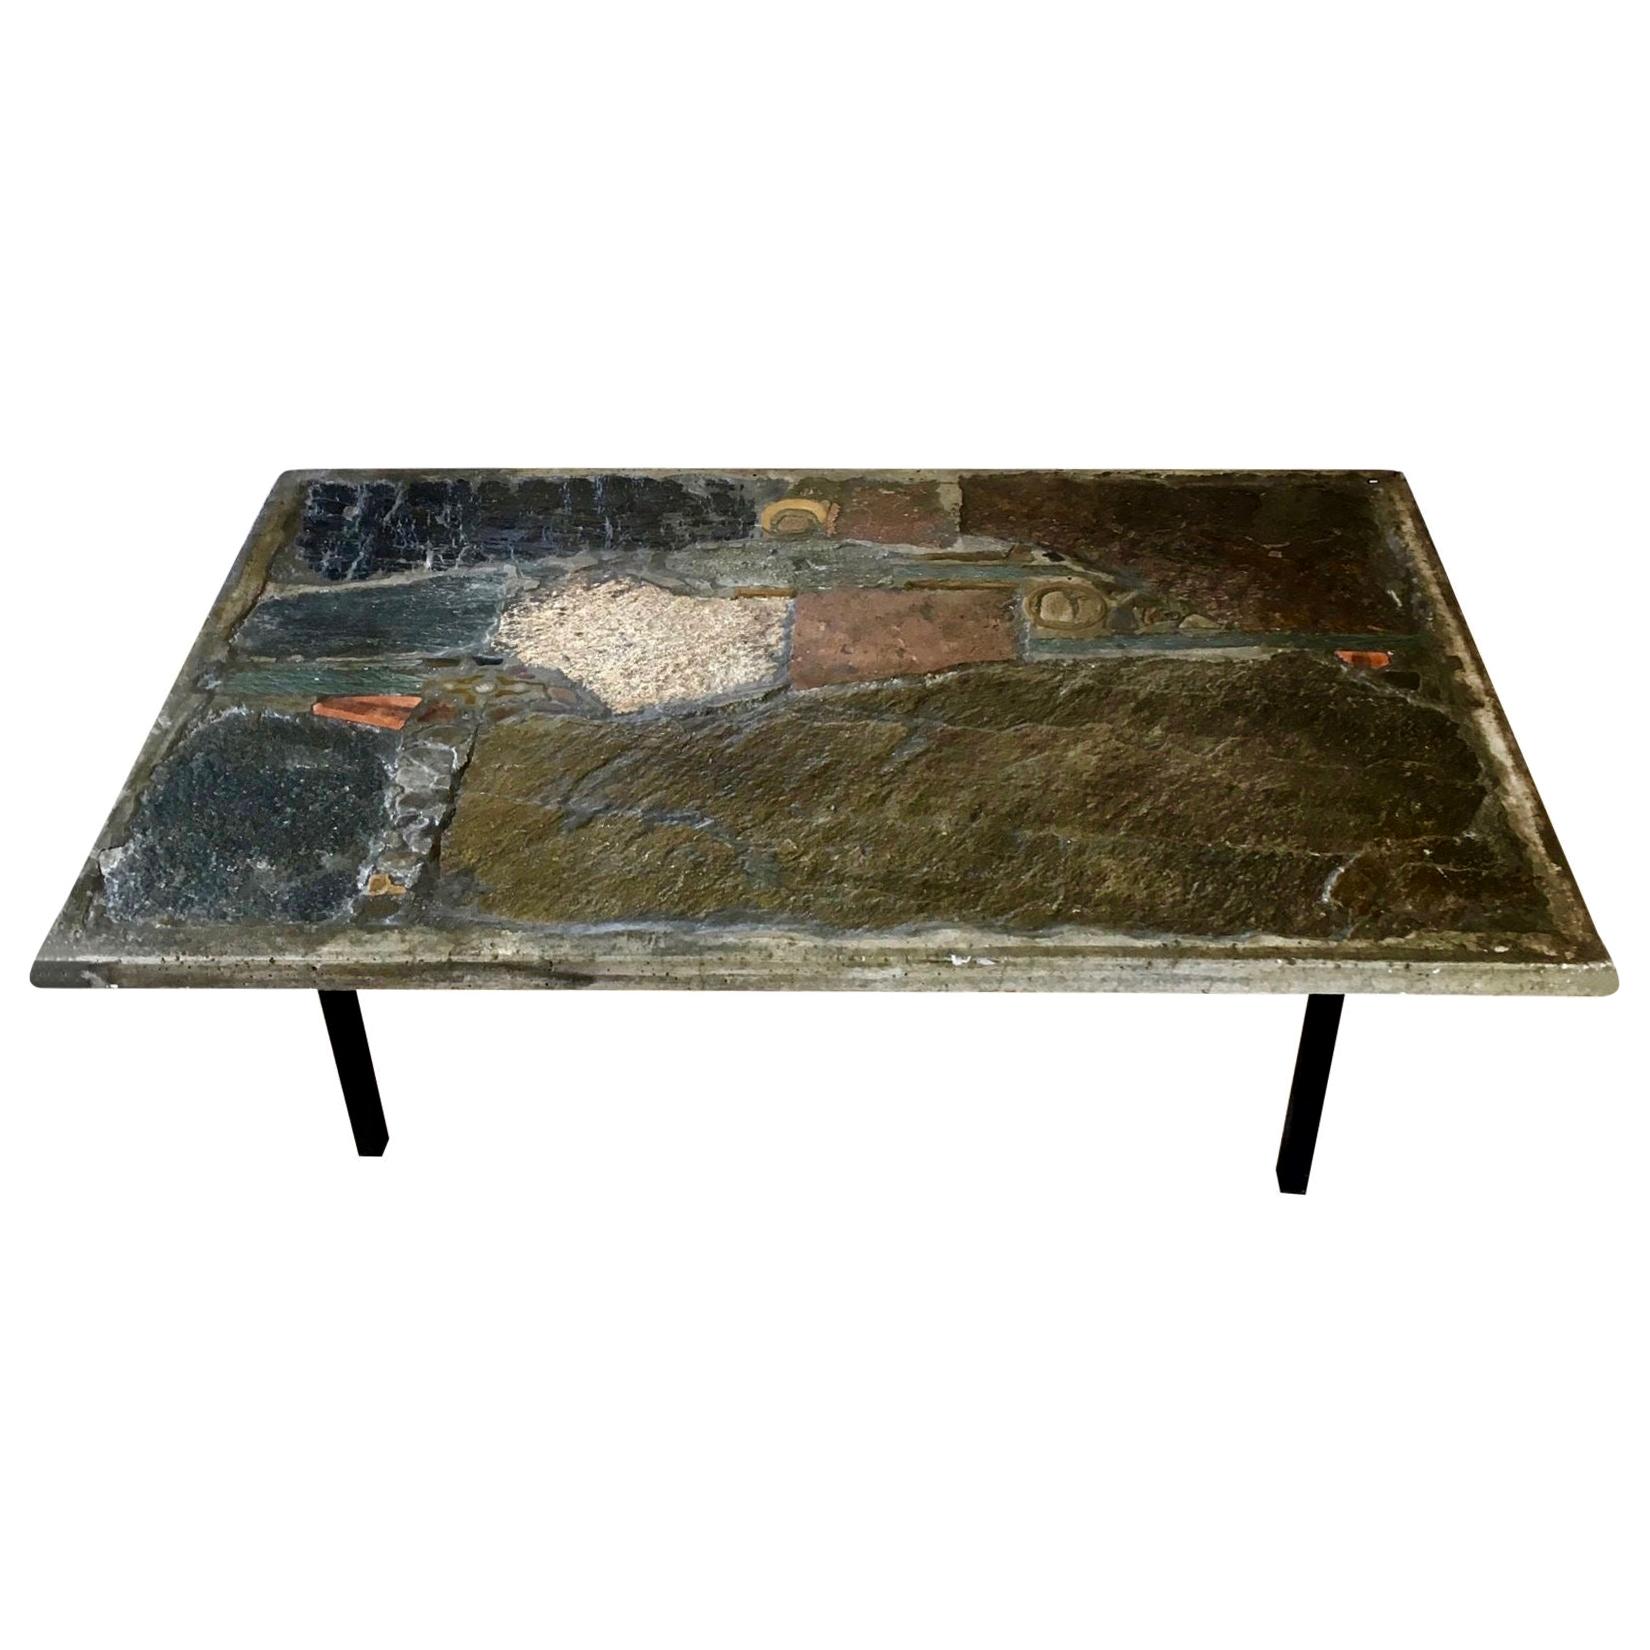 Brass, Concrete and Slate Coffee Table by Paul Kingma, Signed and Dated 1973